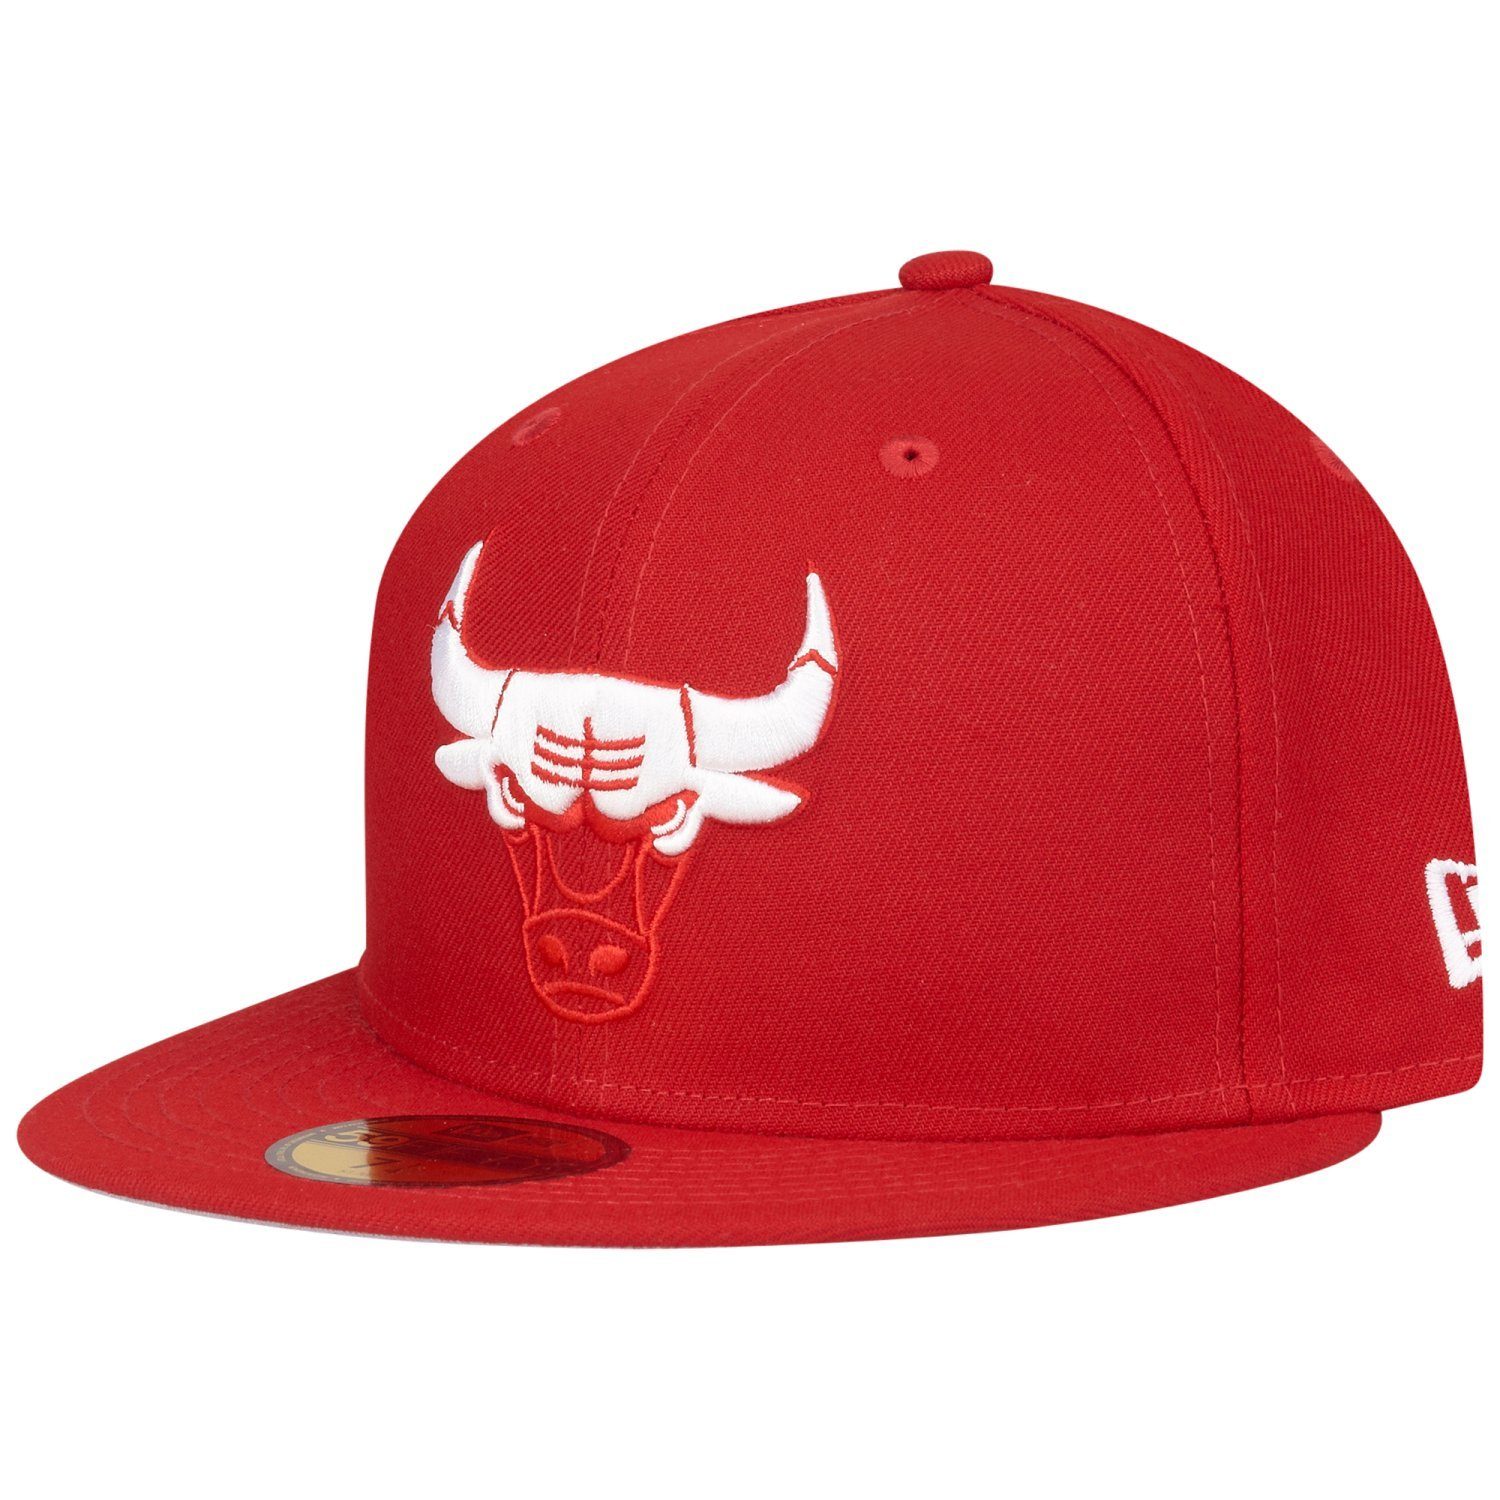 New Era Fitted Cap 59Fifty ELEMENTS NBA Teams Chicago Bulls RED